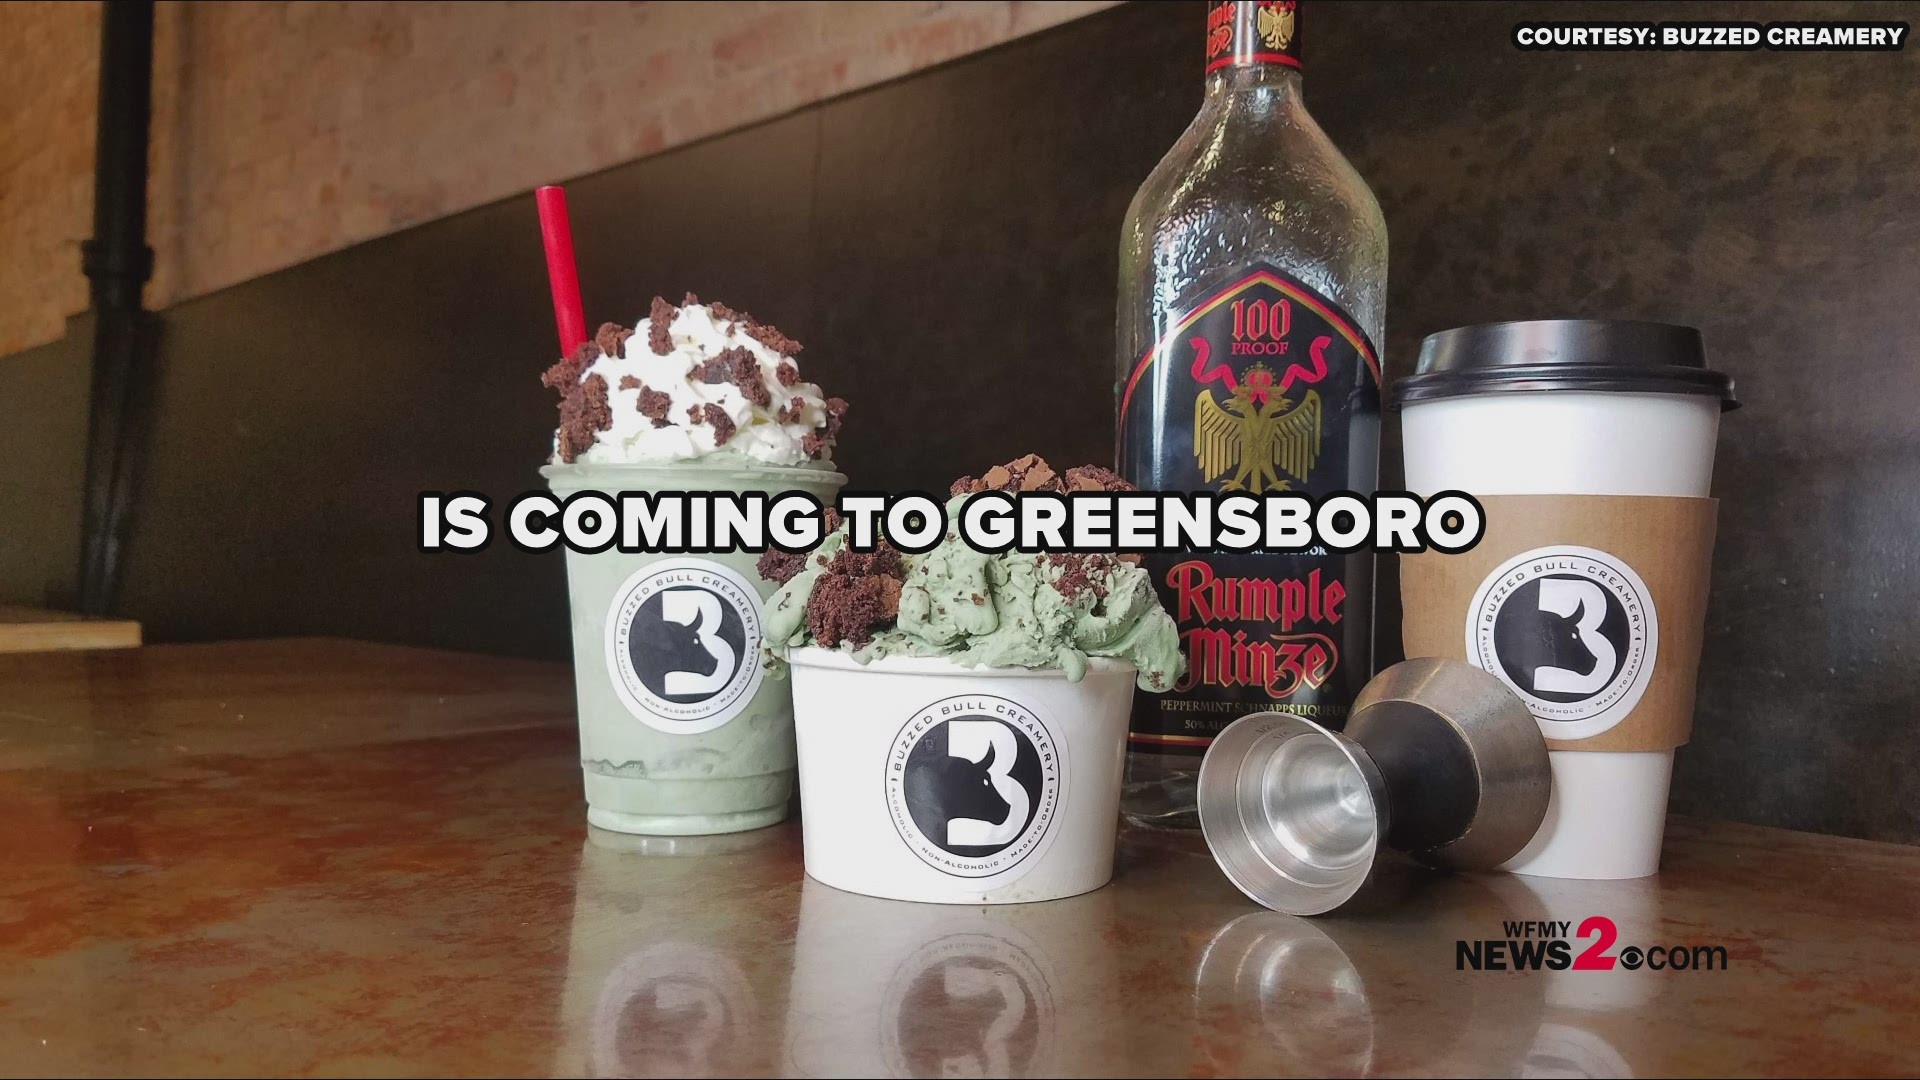 It’s a first of its kind for Greensboro! A liquid nitrogen creamery is coming to the City. That’s right, Buzzed Bull Creamery is setting up shop in the Triad and bring with it both buzzed and non-buzzed ice cream!